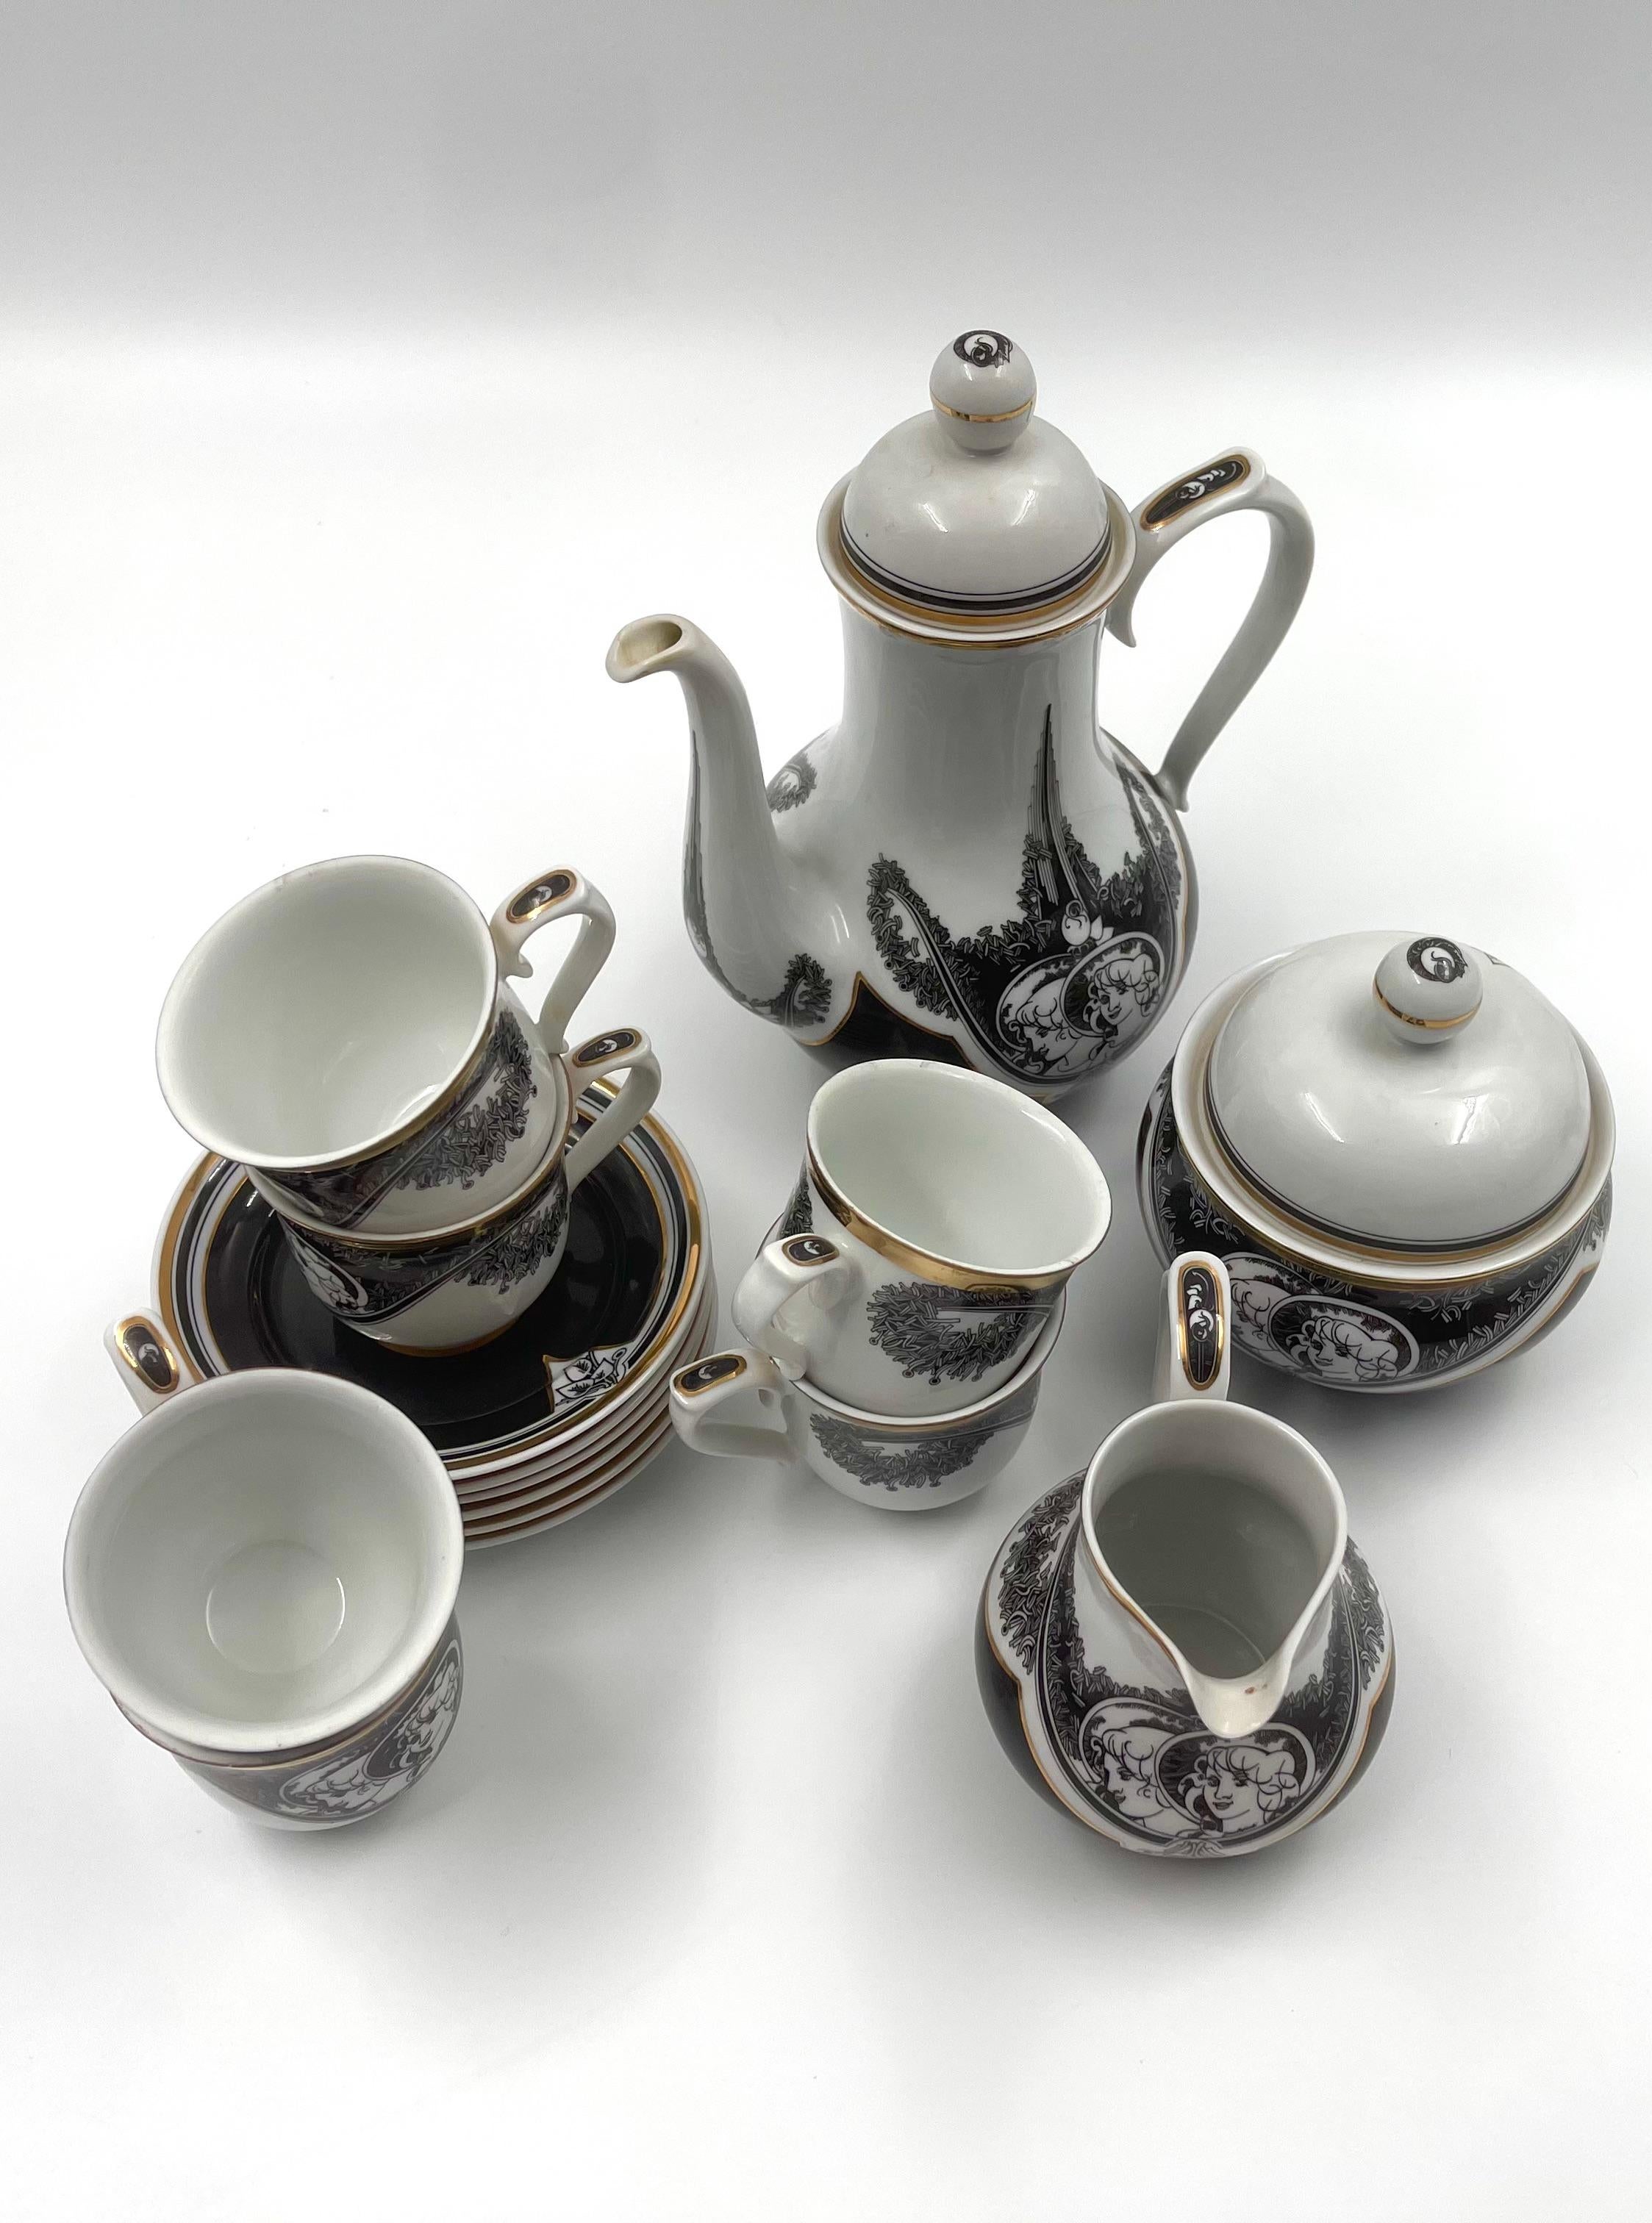 The coffee set designed by László Jurcsák for Hollóházi Manufacture of Hungary, is a 6-person collection. Production was limited, and only a few pieces were made available for purchase. This rare set presents a great opportunity for collectors to